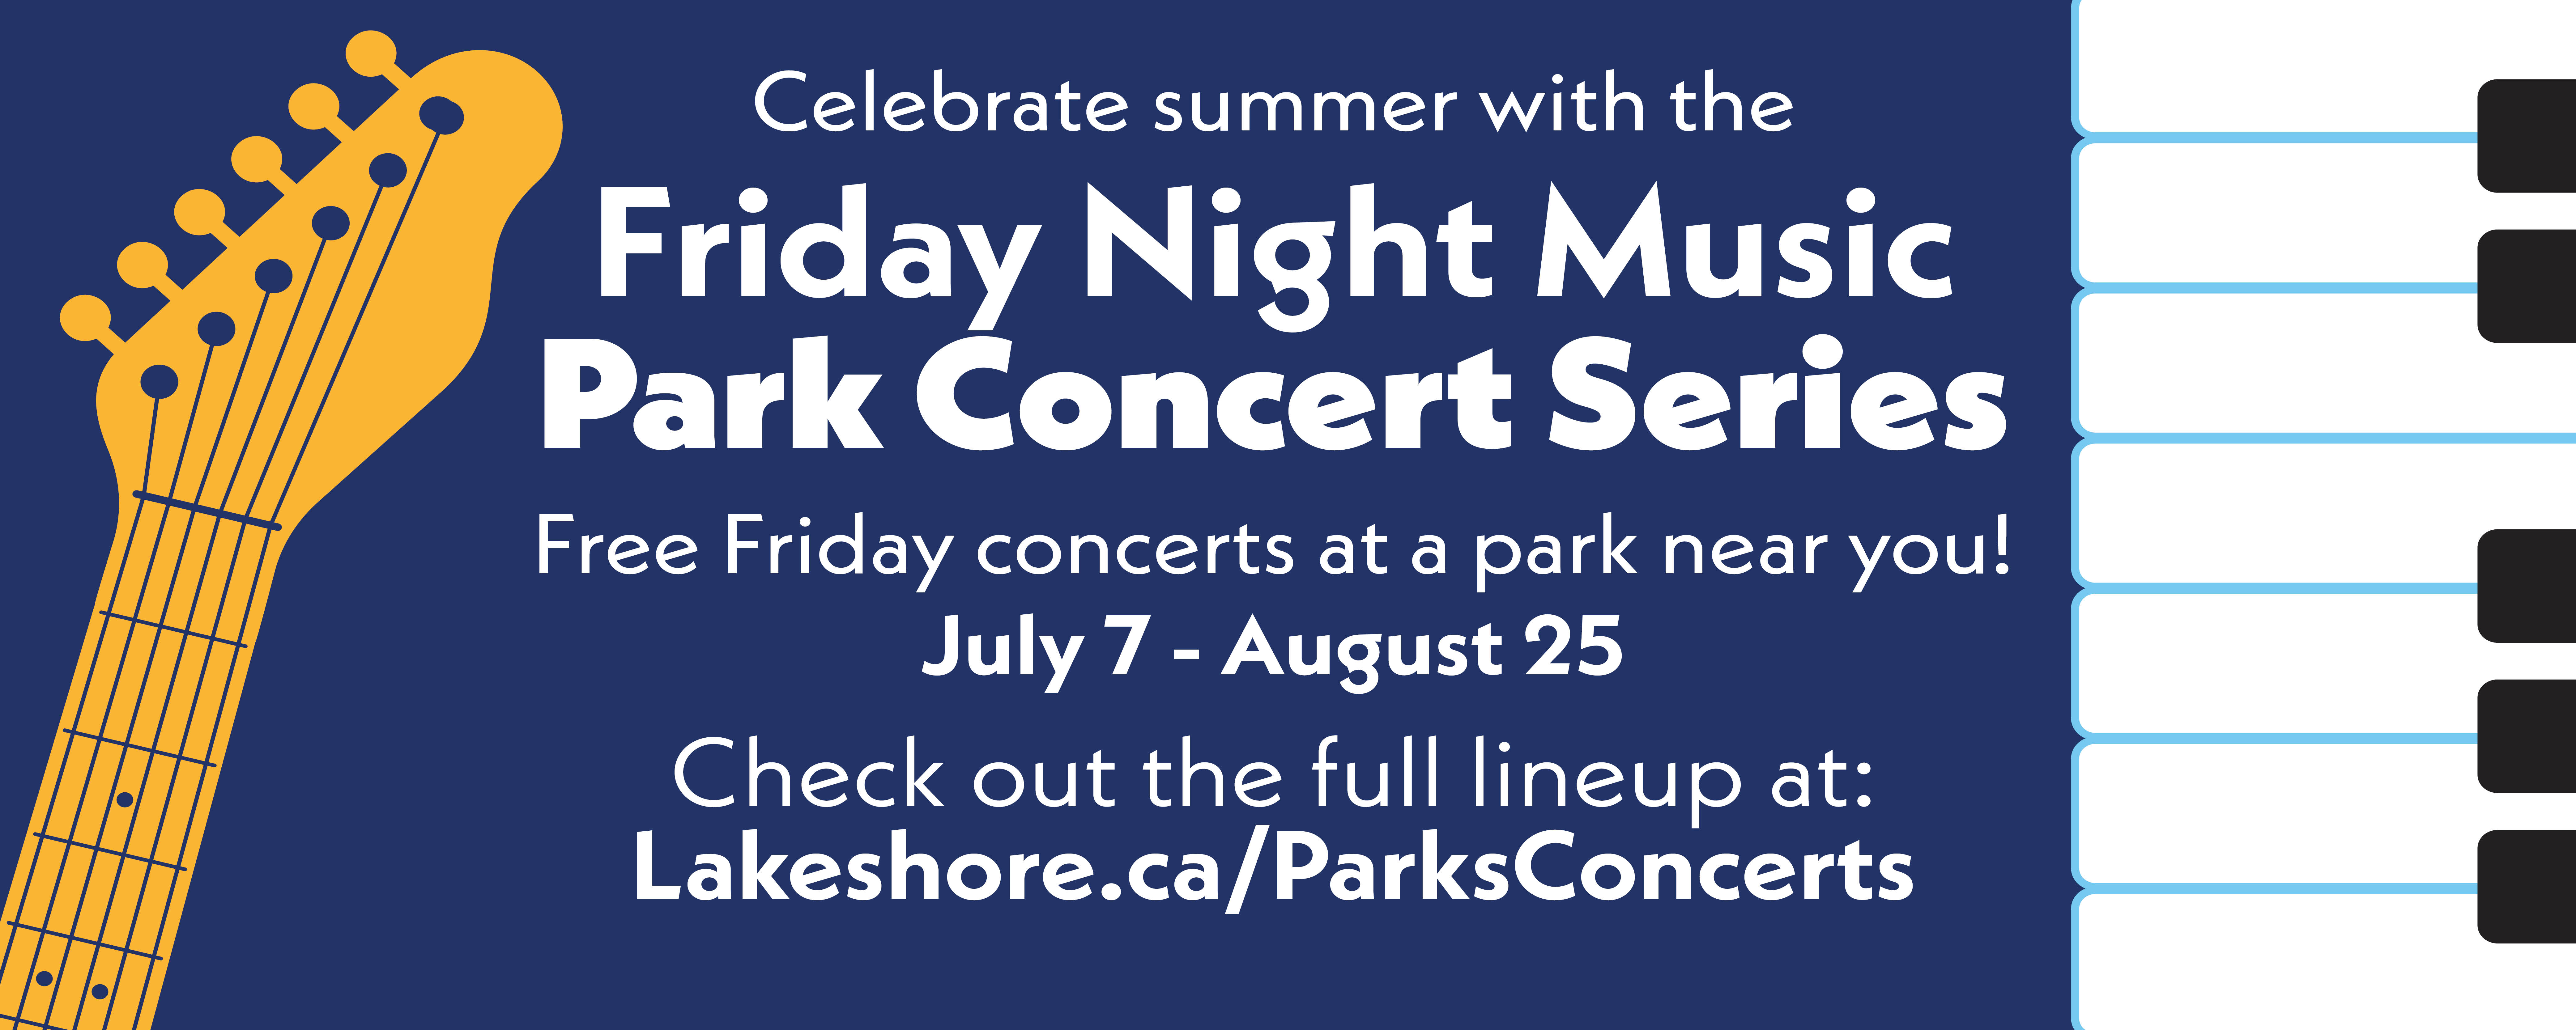 Parks concert footer. Text reads: Celebrate summer with the Friday Night Music Park Concert Series. Free Friday concerts at a park near you! July 7 - August 25, Check out the full lineup at: Lakeshore.ca/ParksConcerts